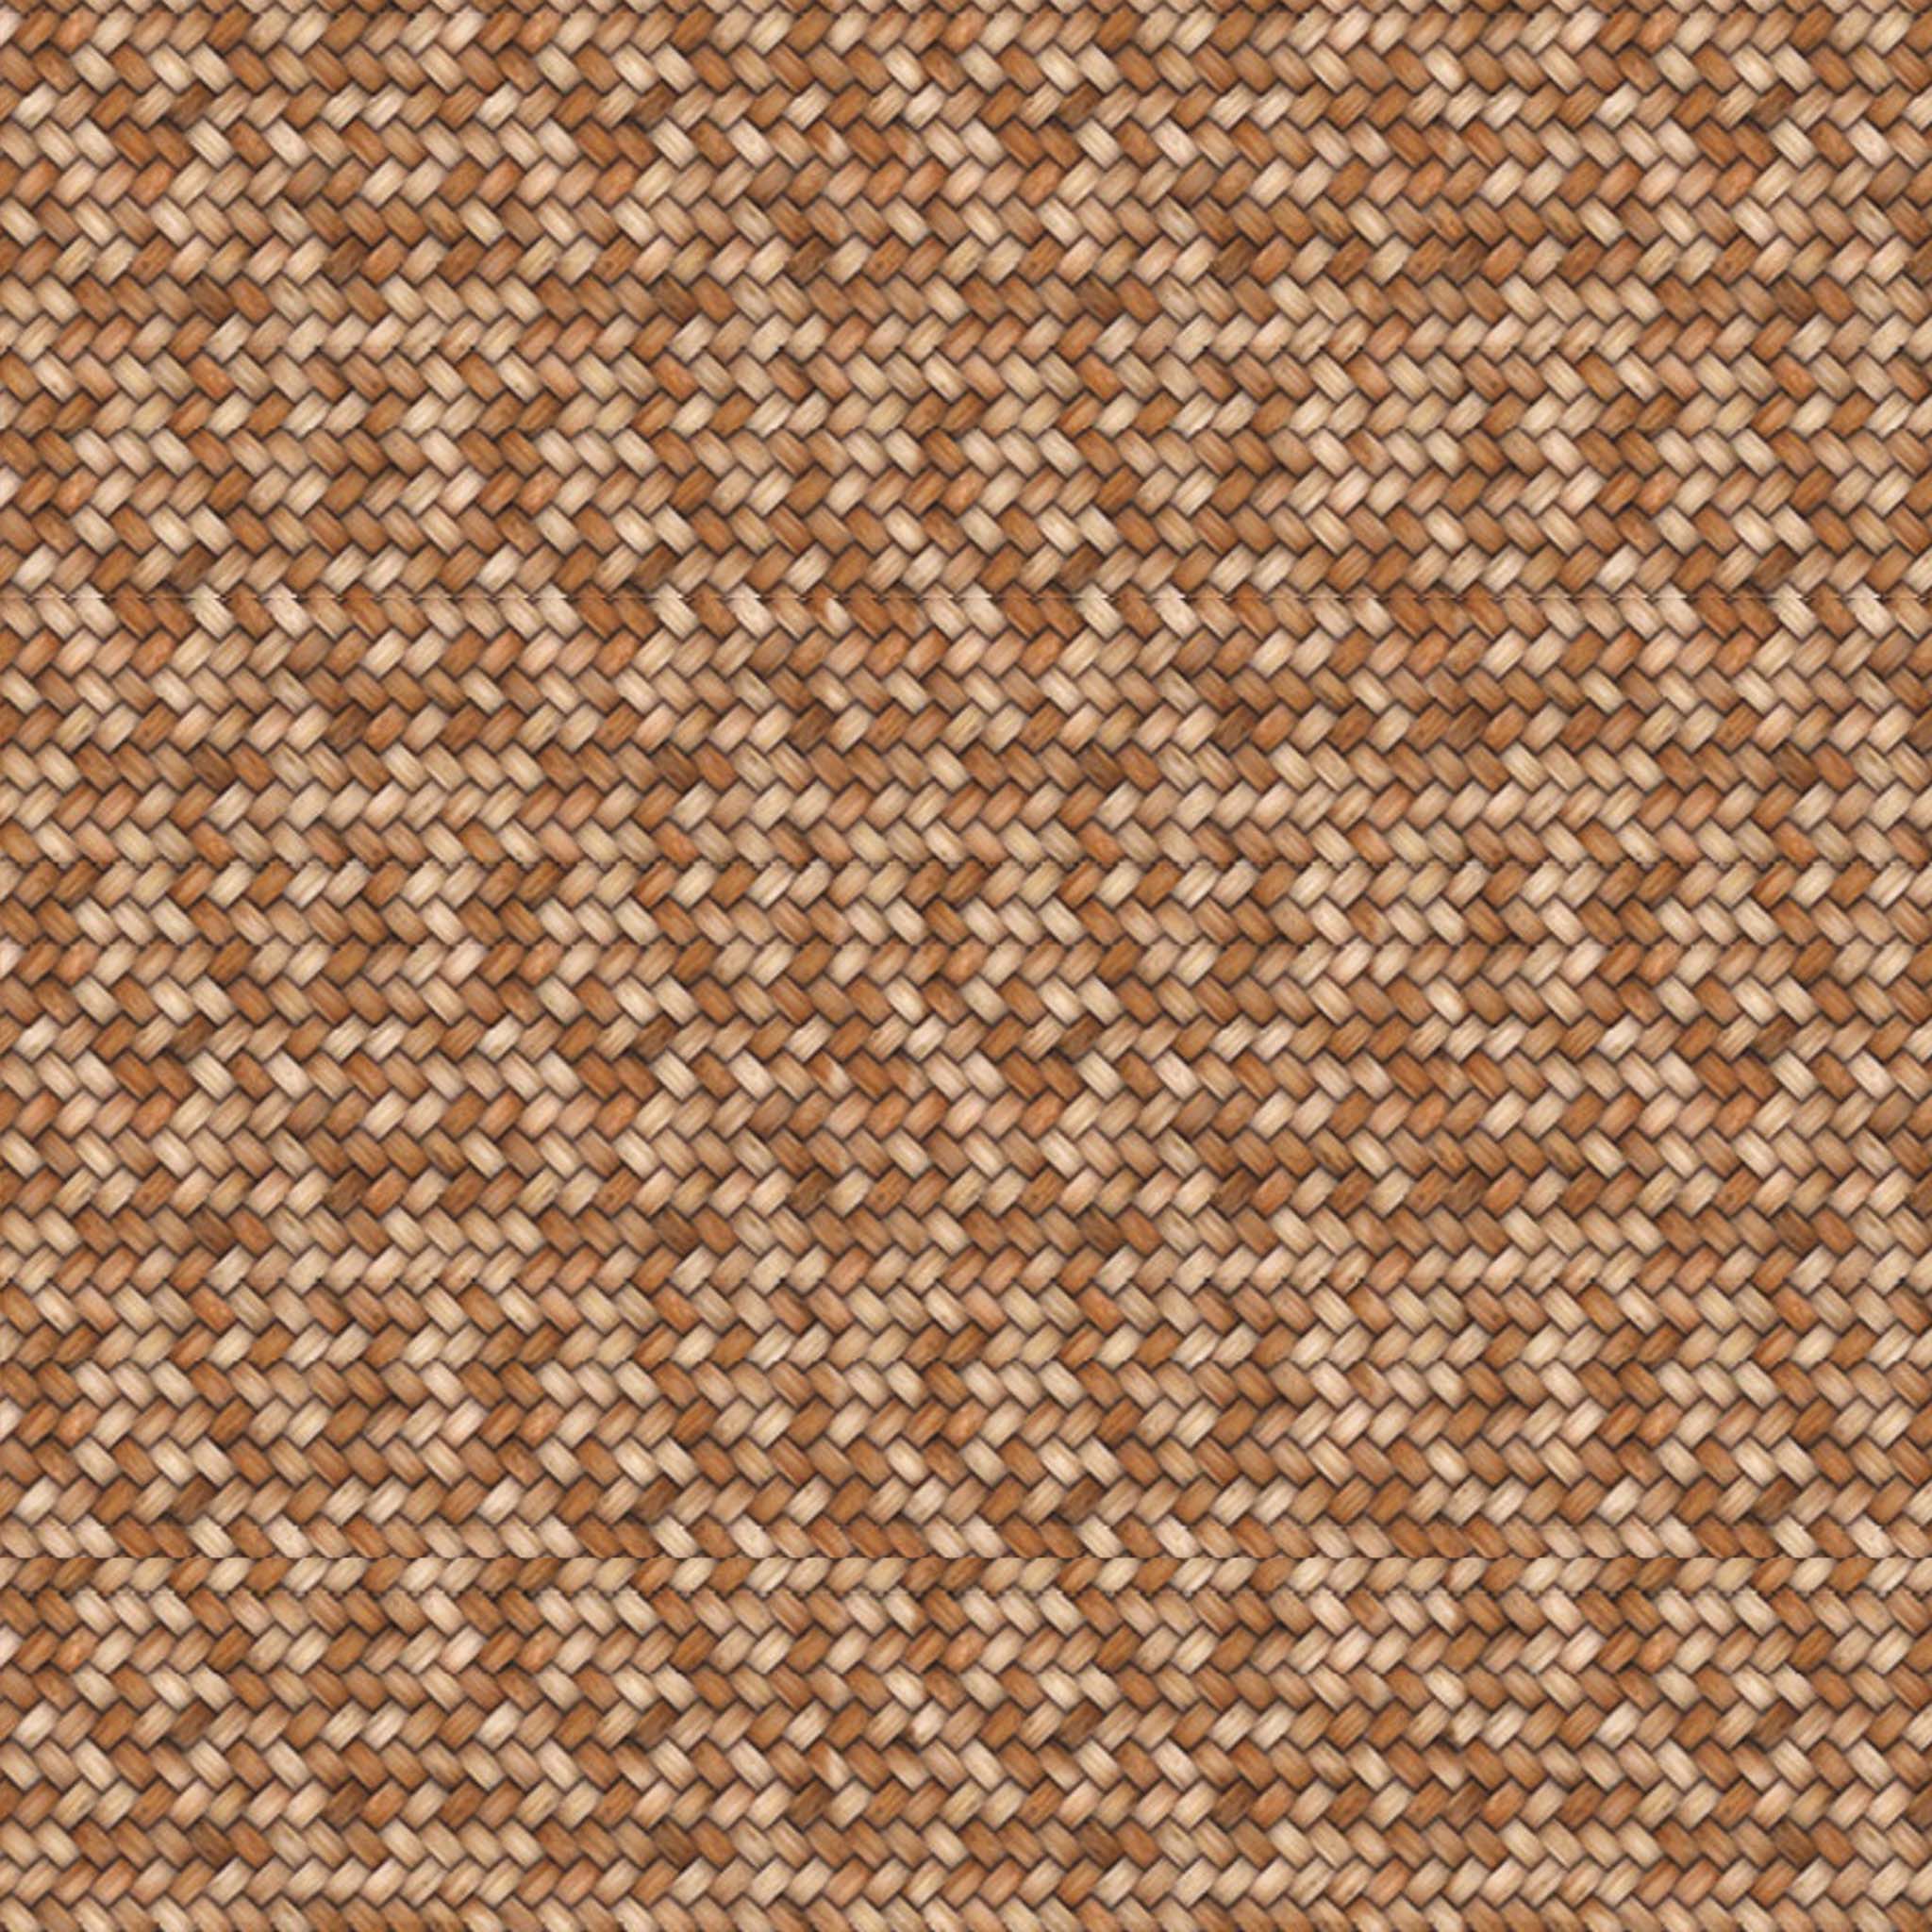 A1 fiber paper design that features a repeating braid pattern in subtle, neutral brown shades.